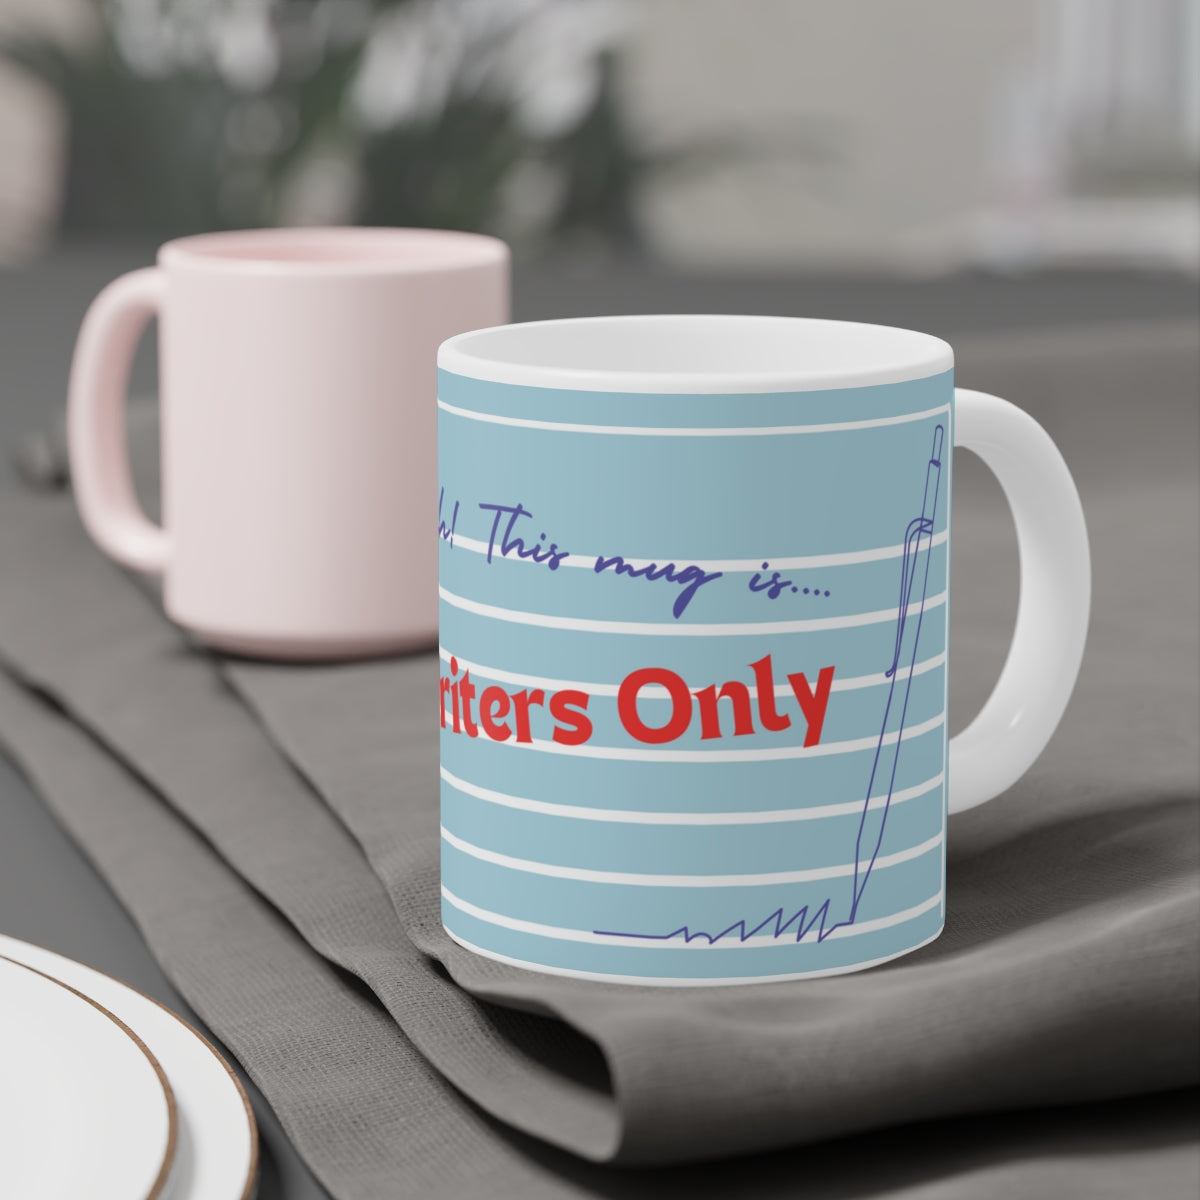 Artemis & Athena Don't Touch! For Writers Only Coffee Mug